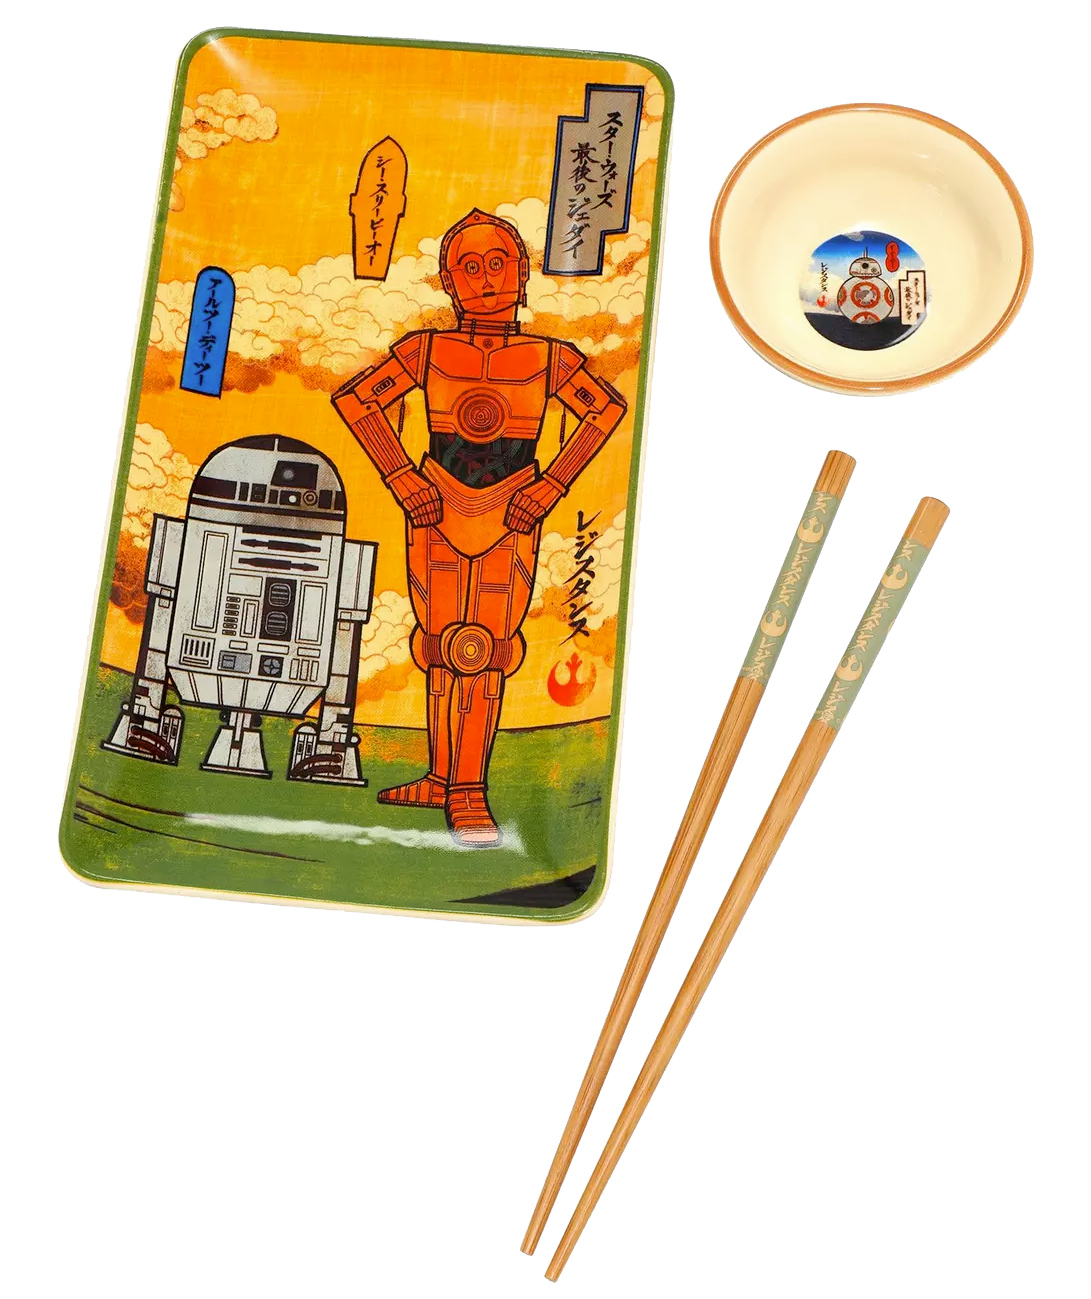 Star Wars Sushi Droids Set with C-3PO, R2-D2 and BB-8